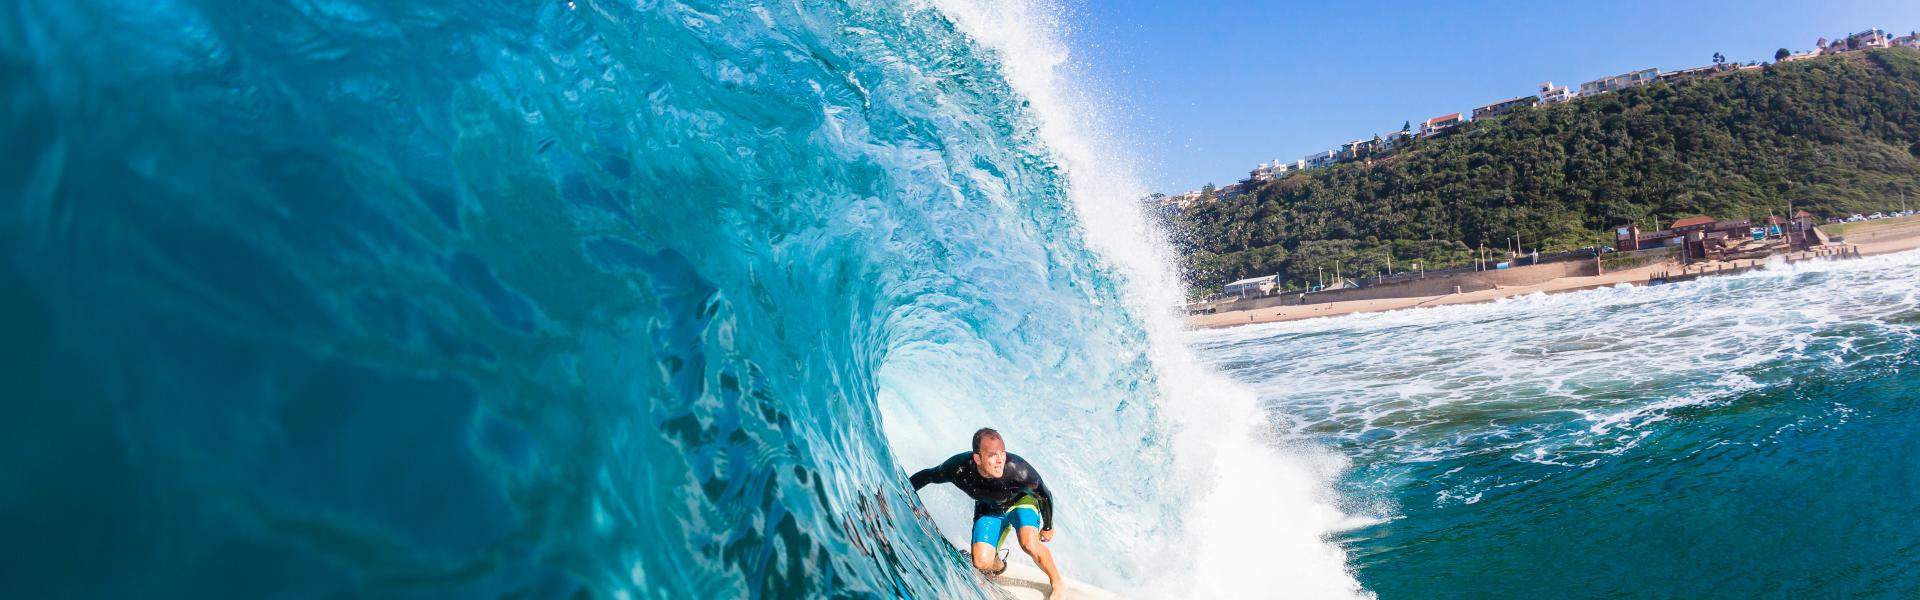 Surfing Vacations in Bali - HomeToGo